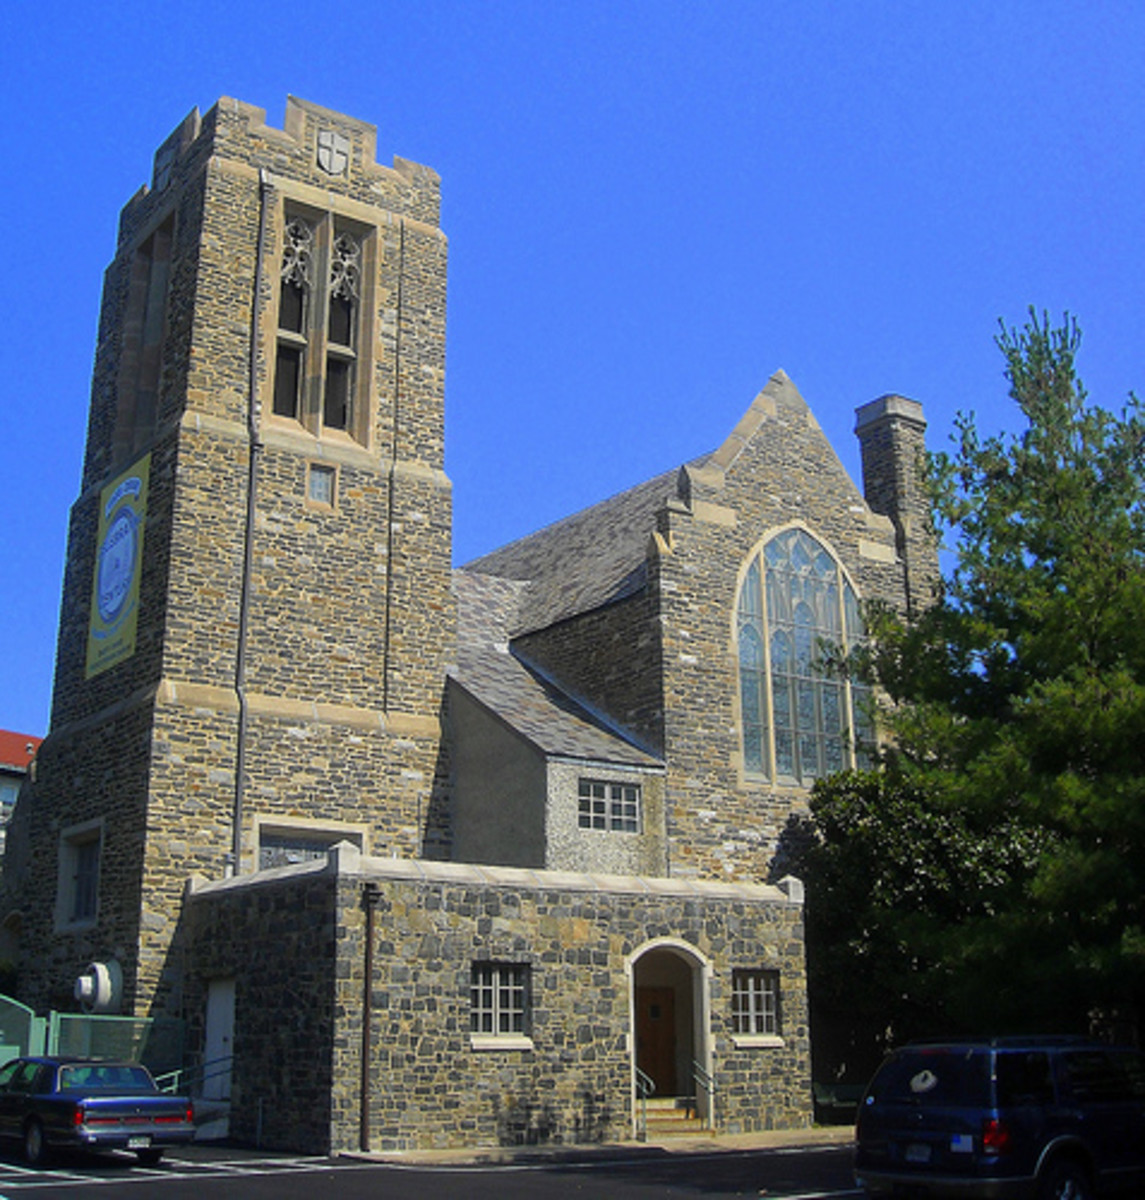 The address "1 Chevy Chase Circle" is the Chevy Chase Presbyterian Church 